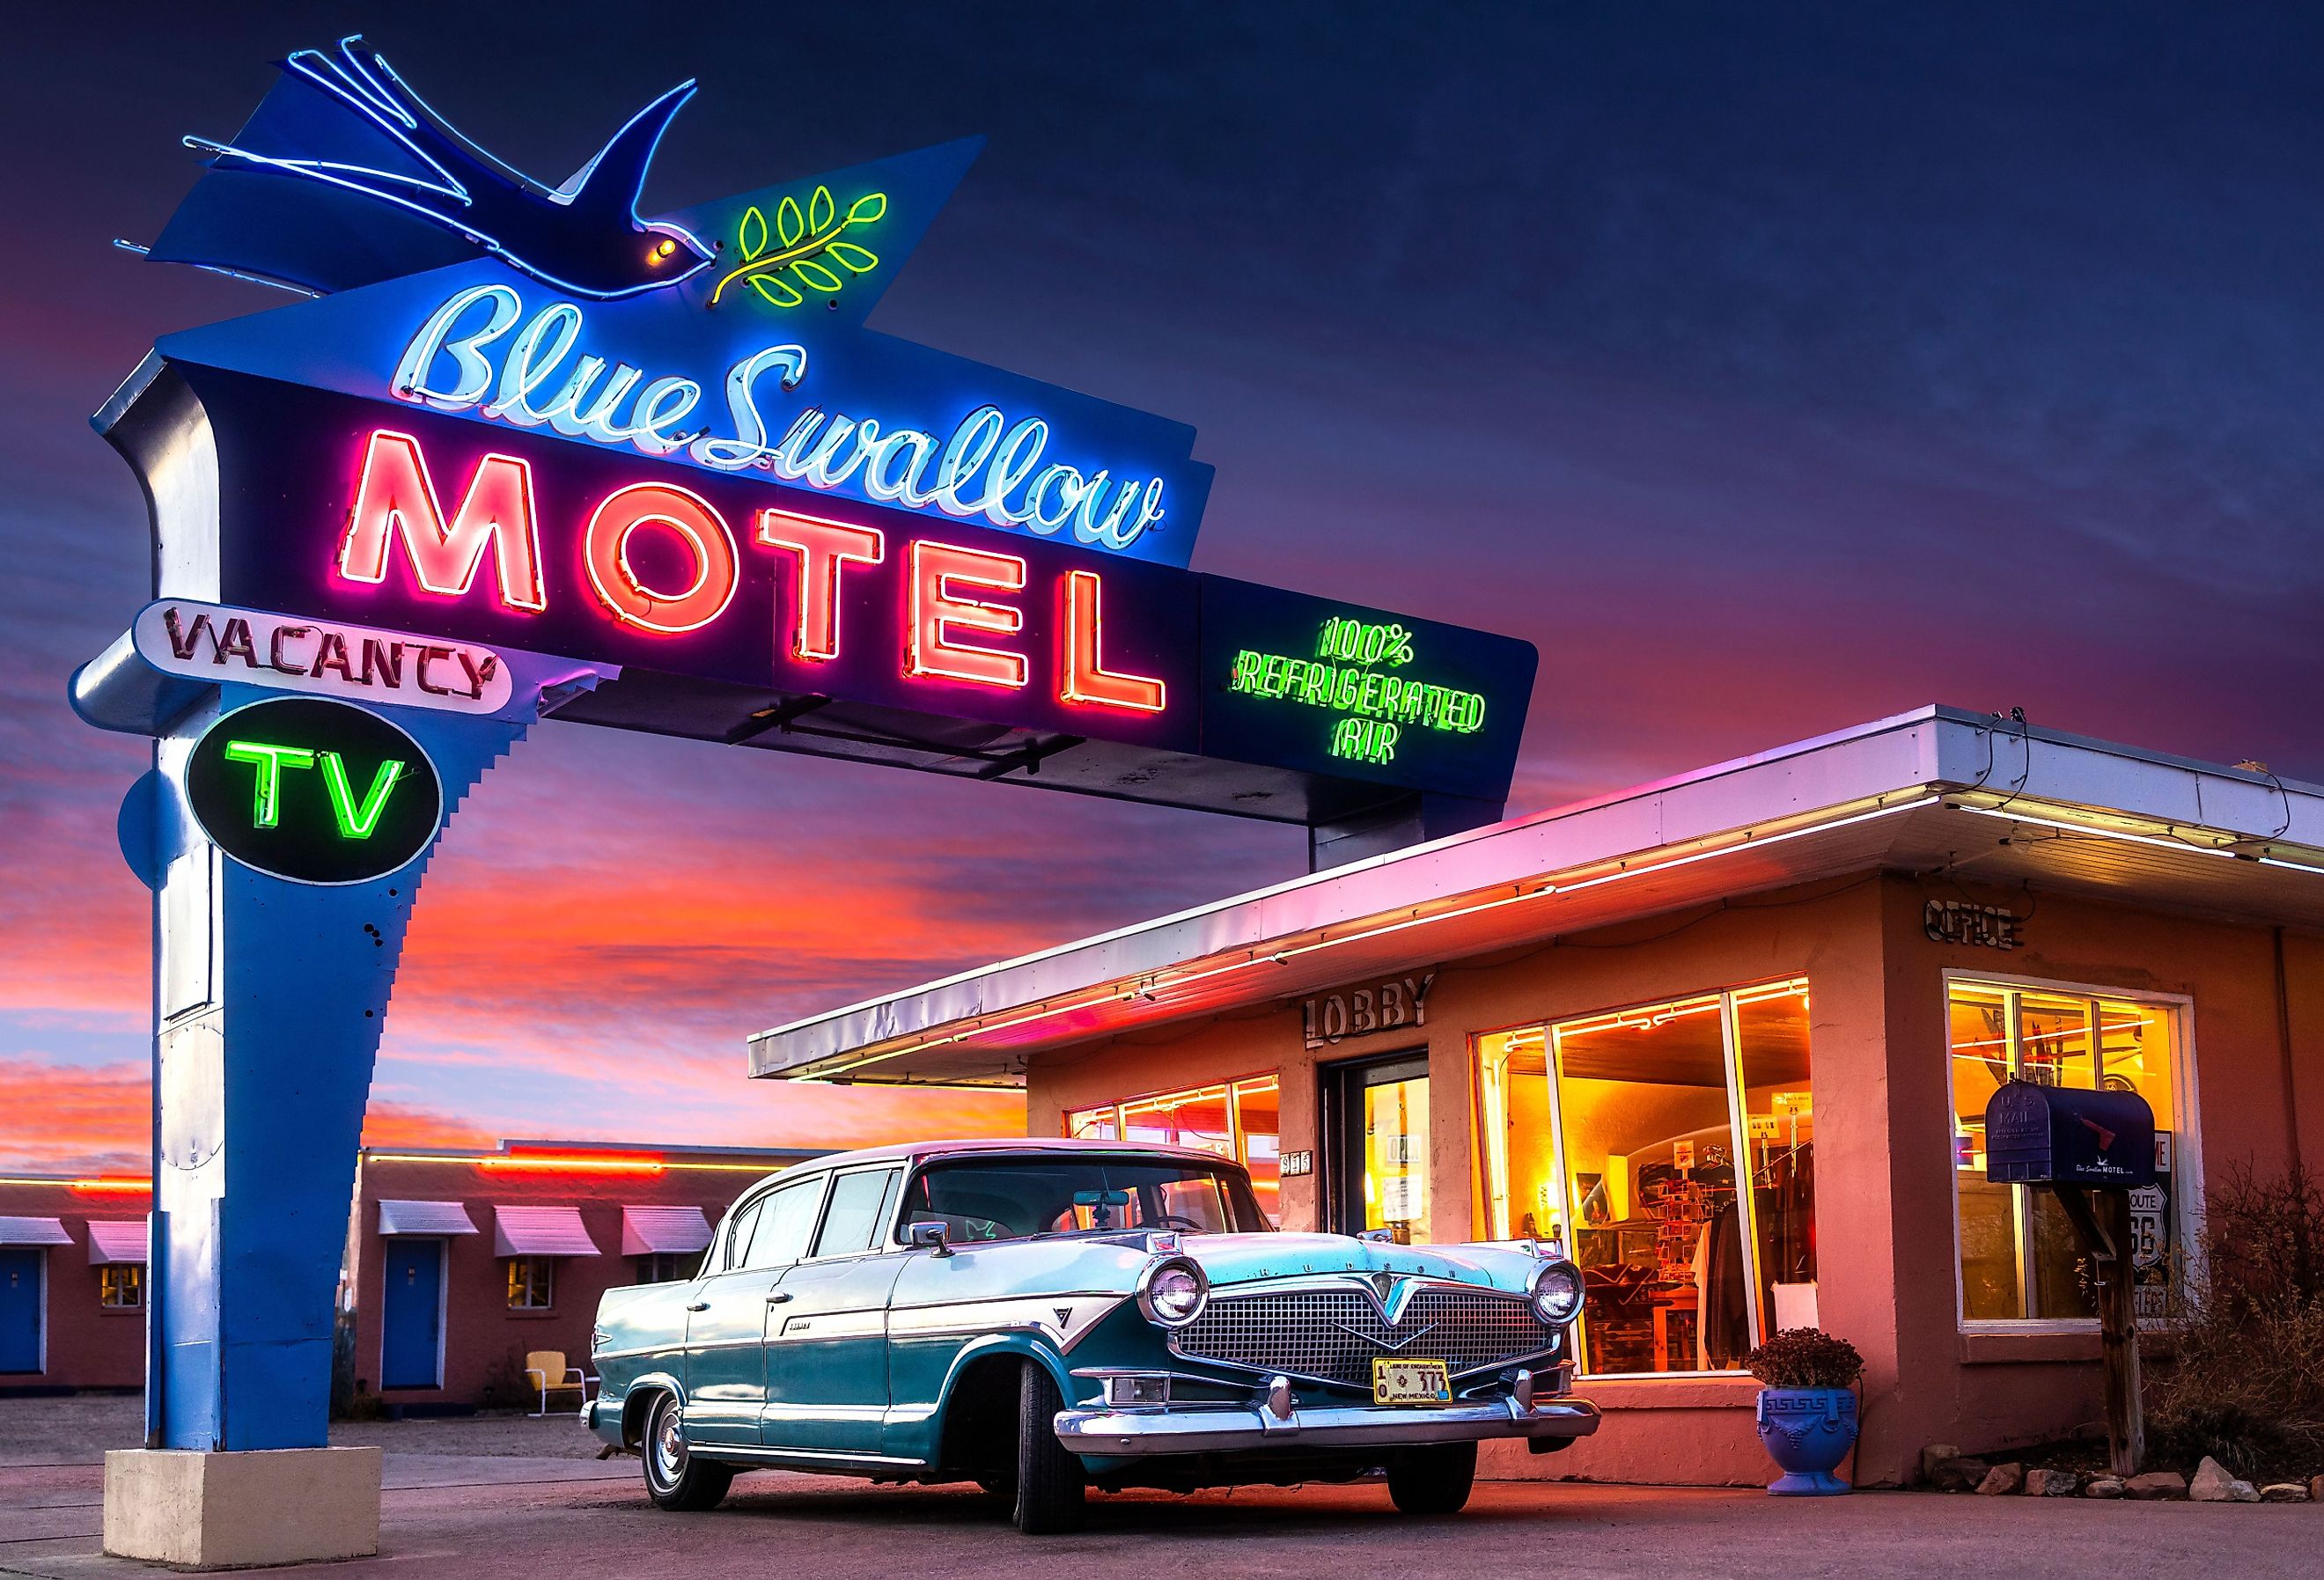 Historic Blue Swallow Motel on Route 66 with neon and classic car at sunset in Tucumcari via Shutterstock.